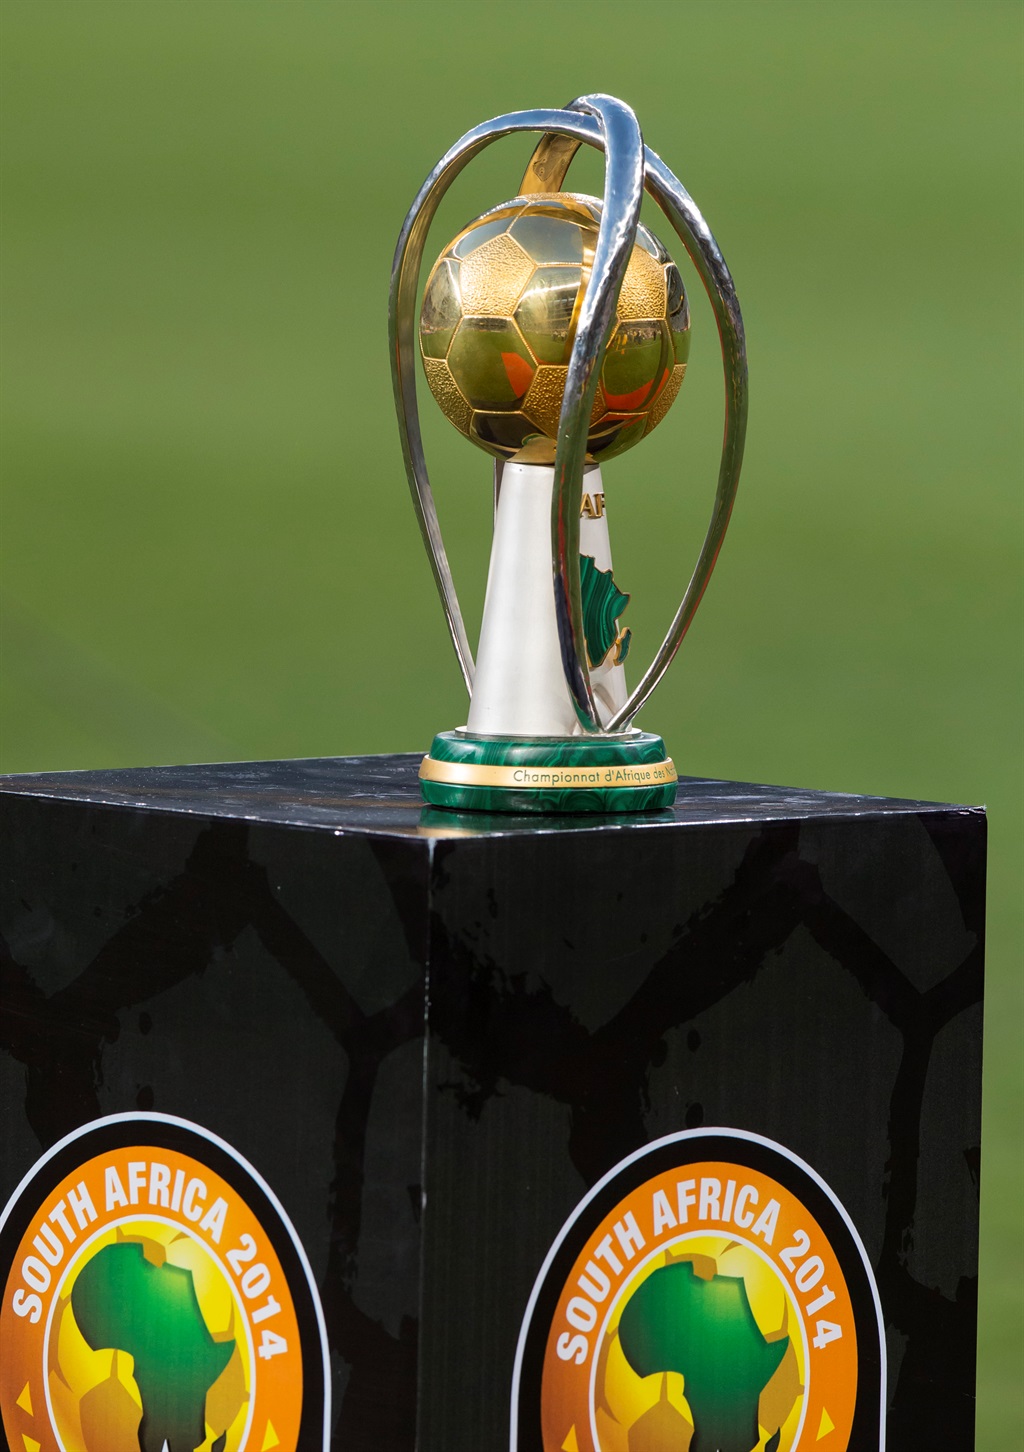 African Nations Championship trophy